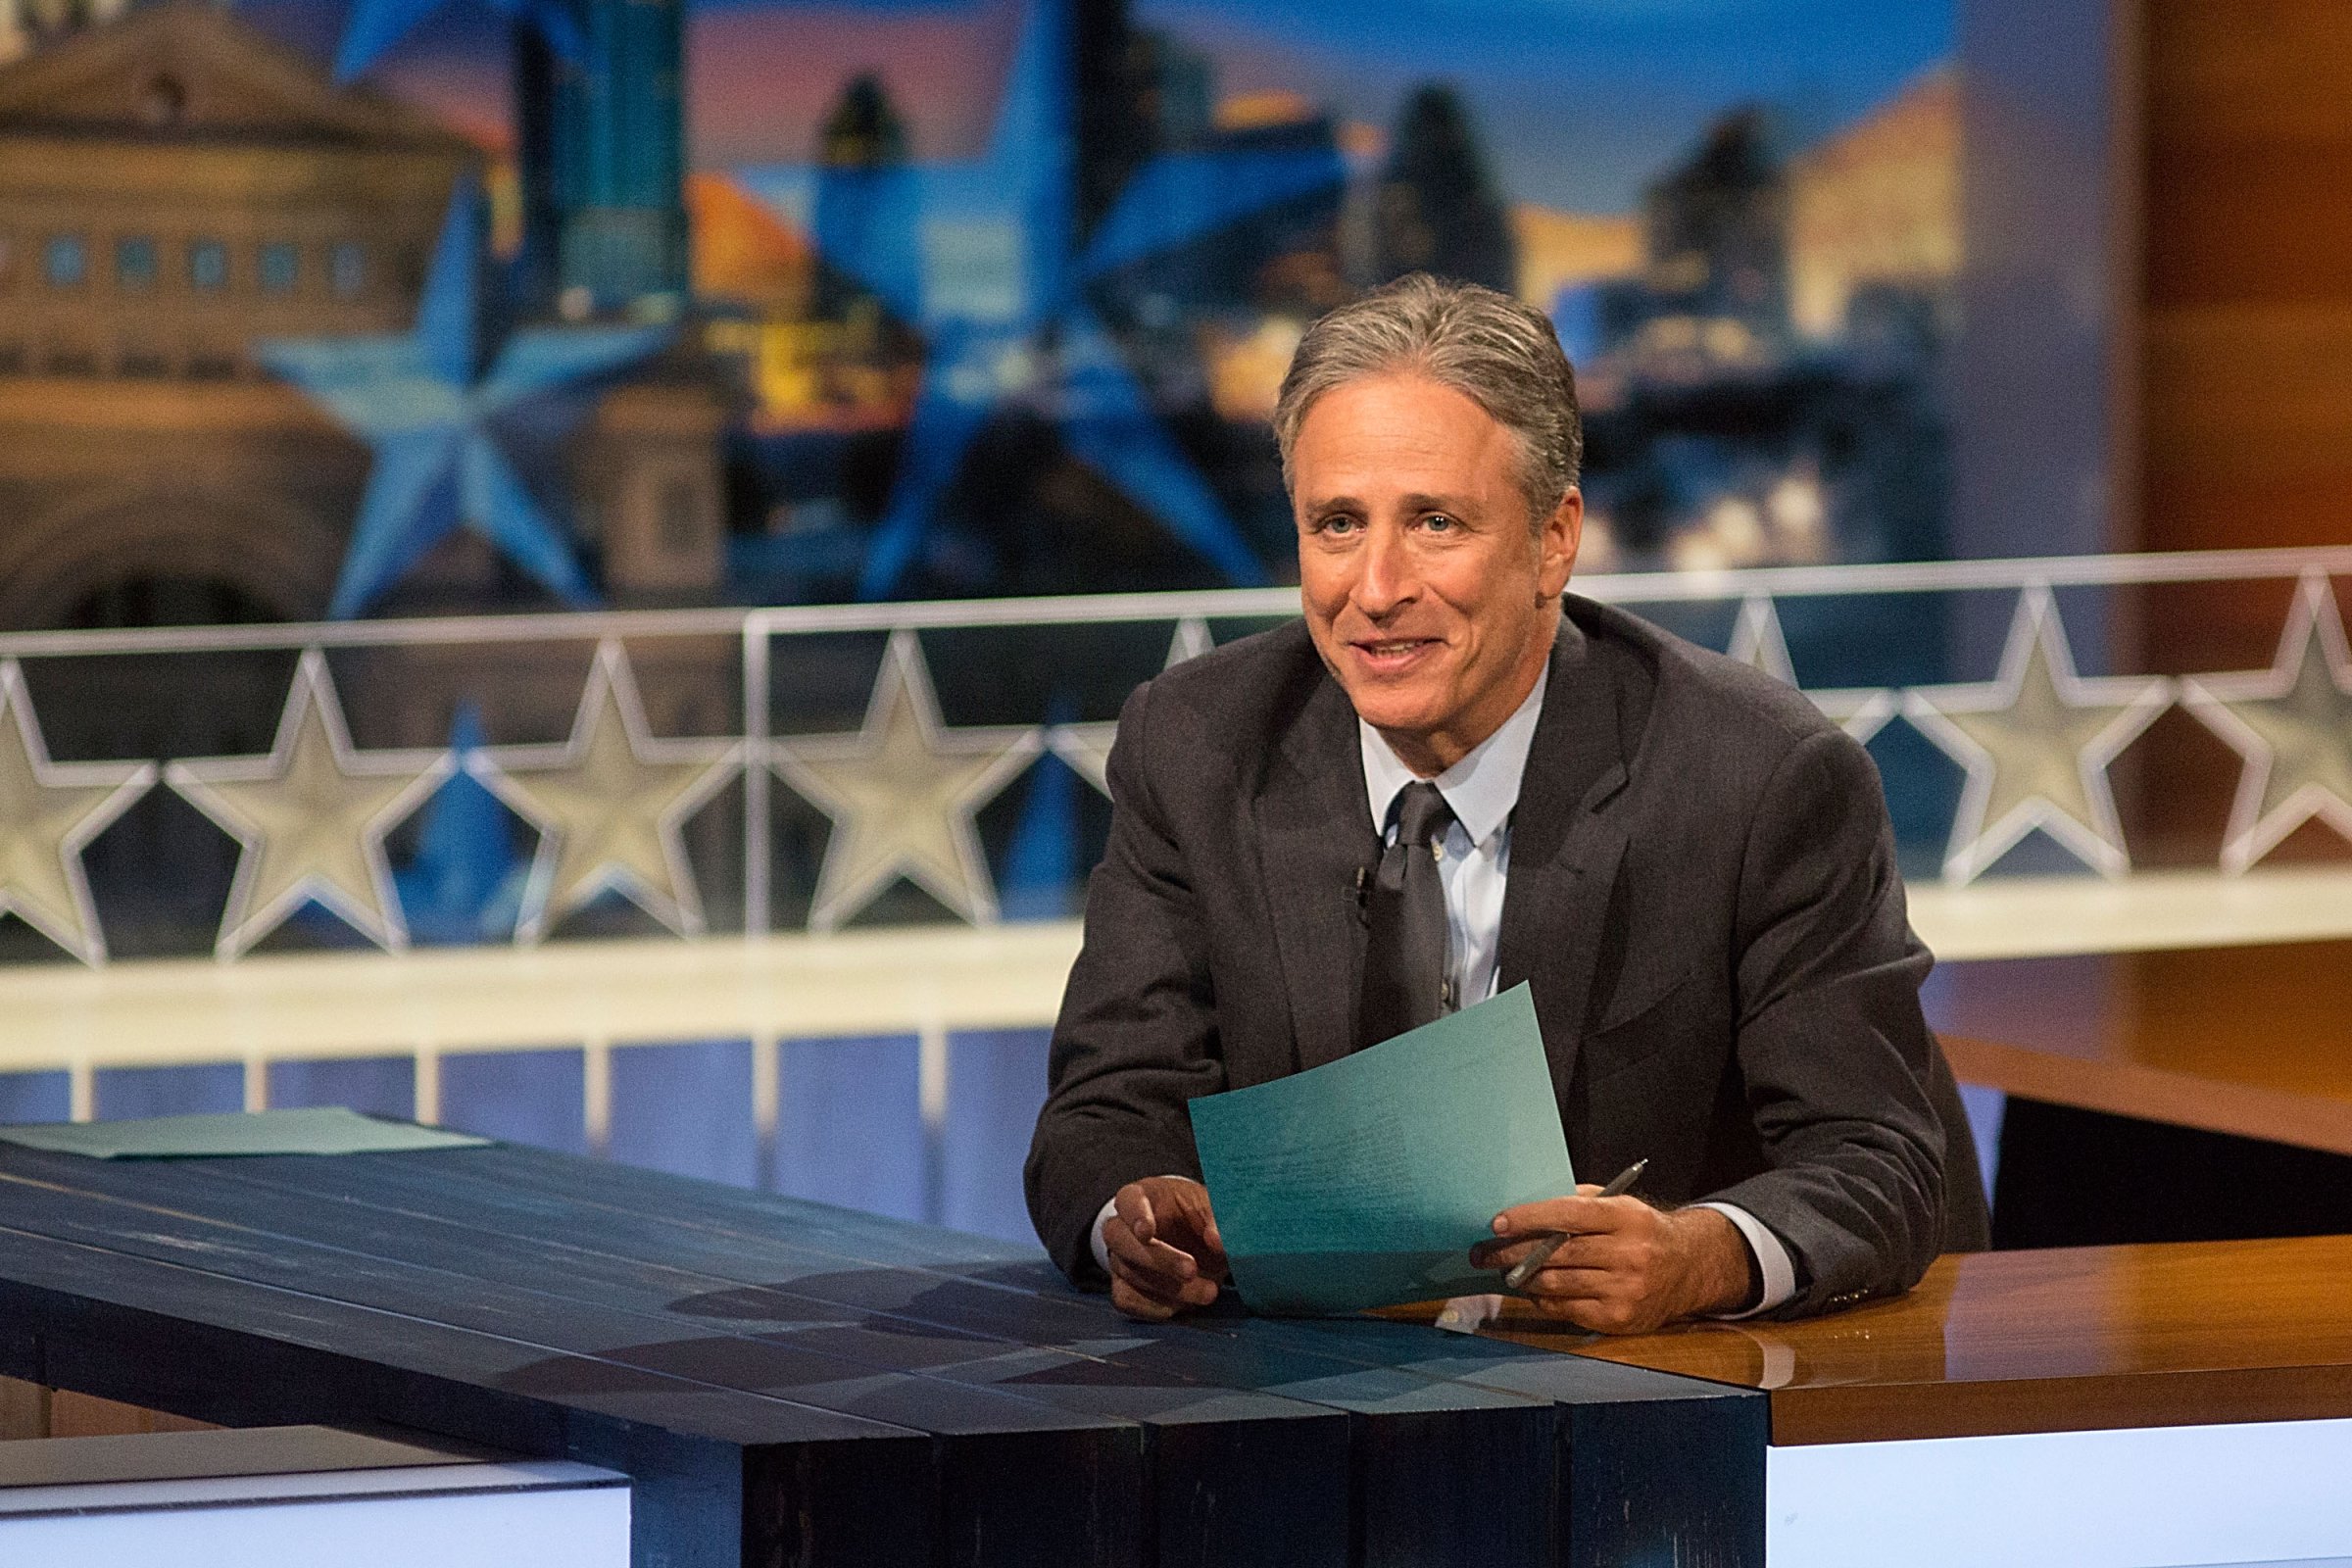 Host Jon Stewart at "The Daily Show with Jon Stewart" covers the Midterm elections with "Democalypse 2014: South By South Mess" on Oct. 28, 2014 in Austin, Texas.